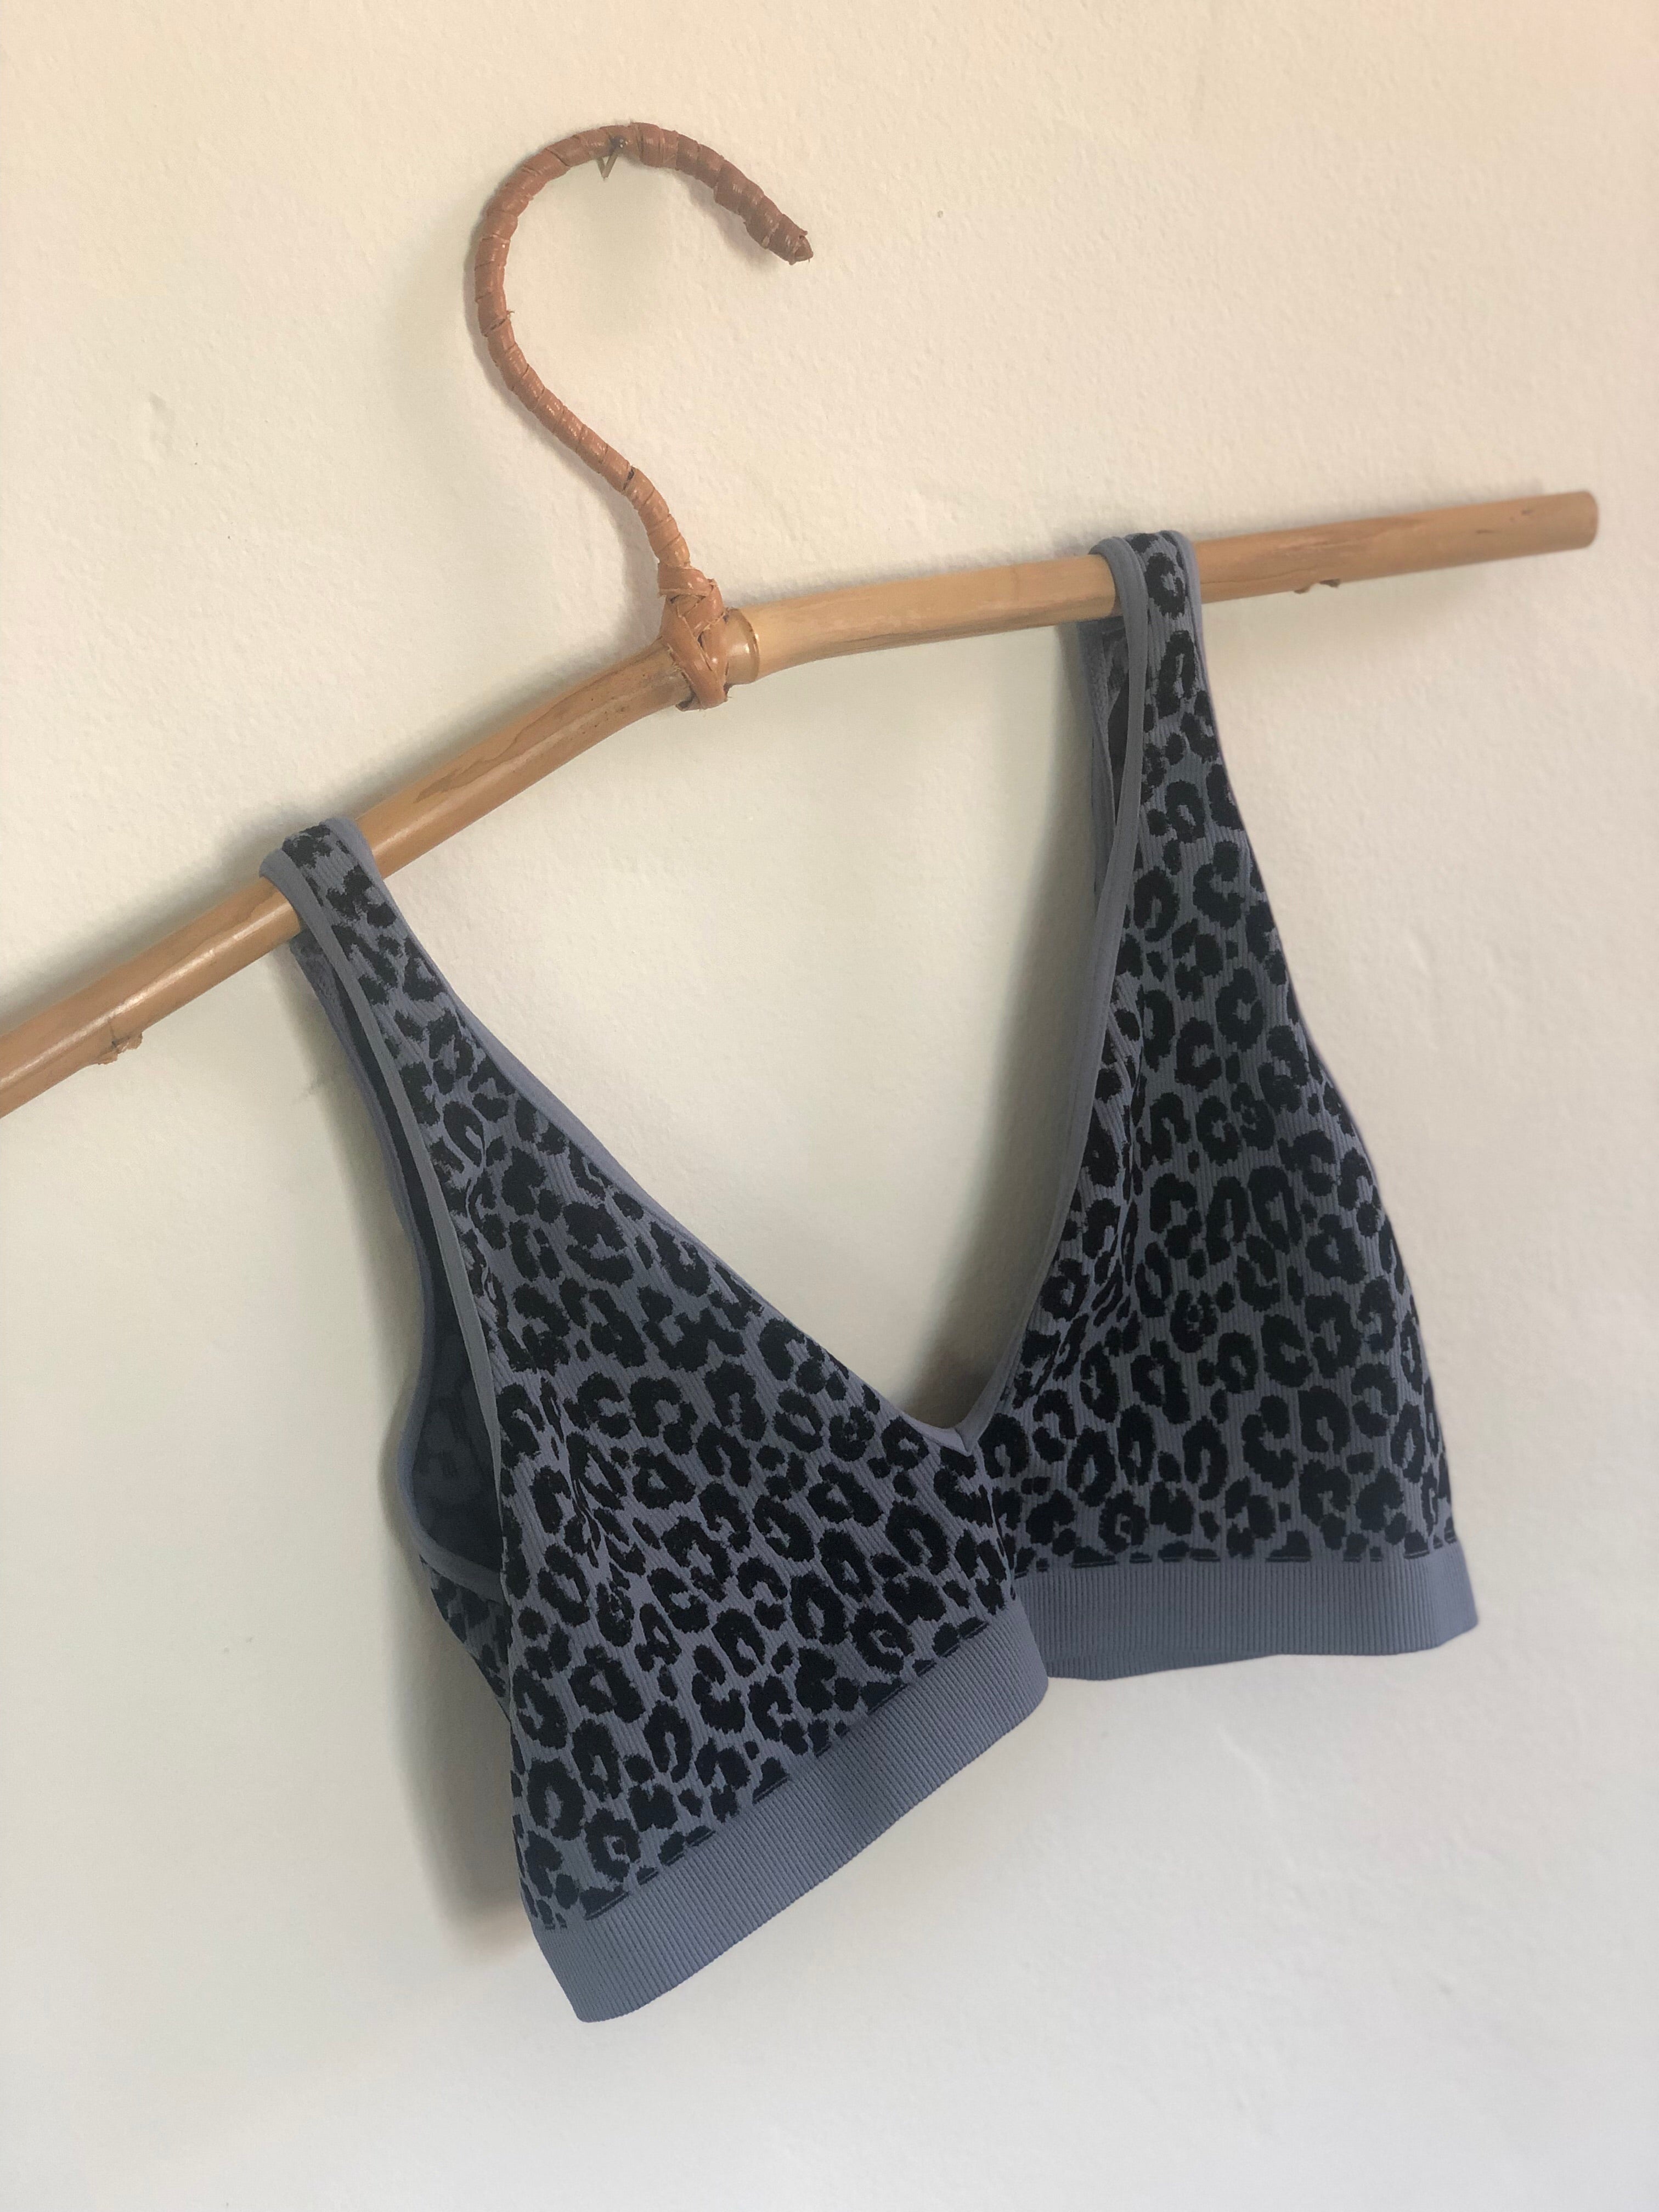 Leopard Seamless Bra - Yoga Clothing by Daughters of Culture